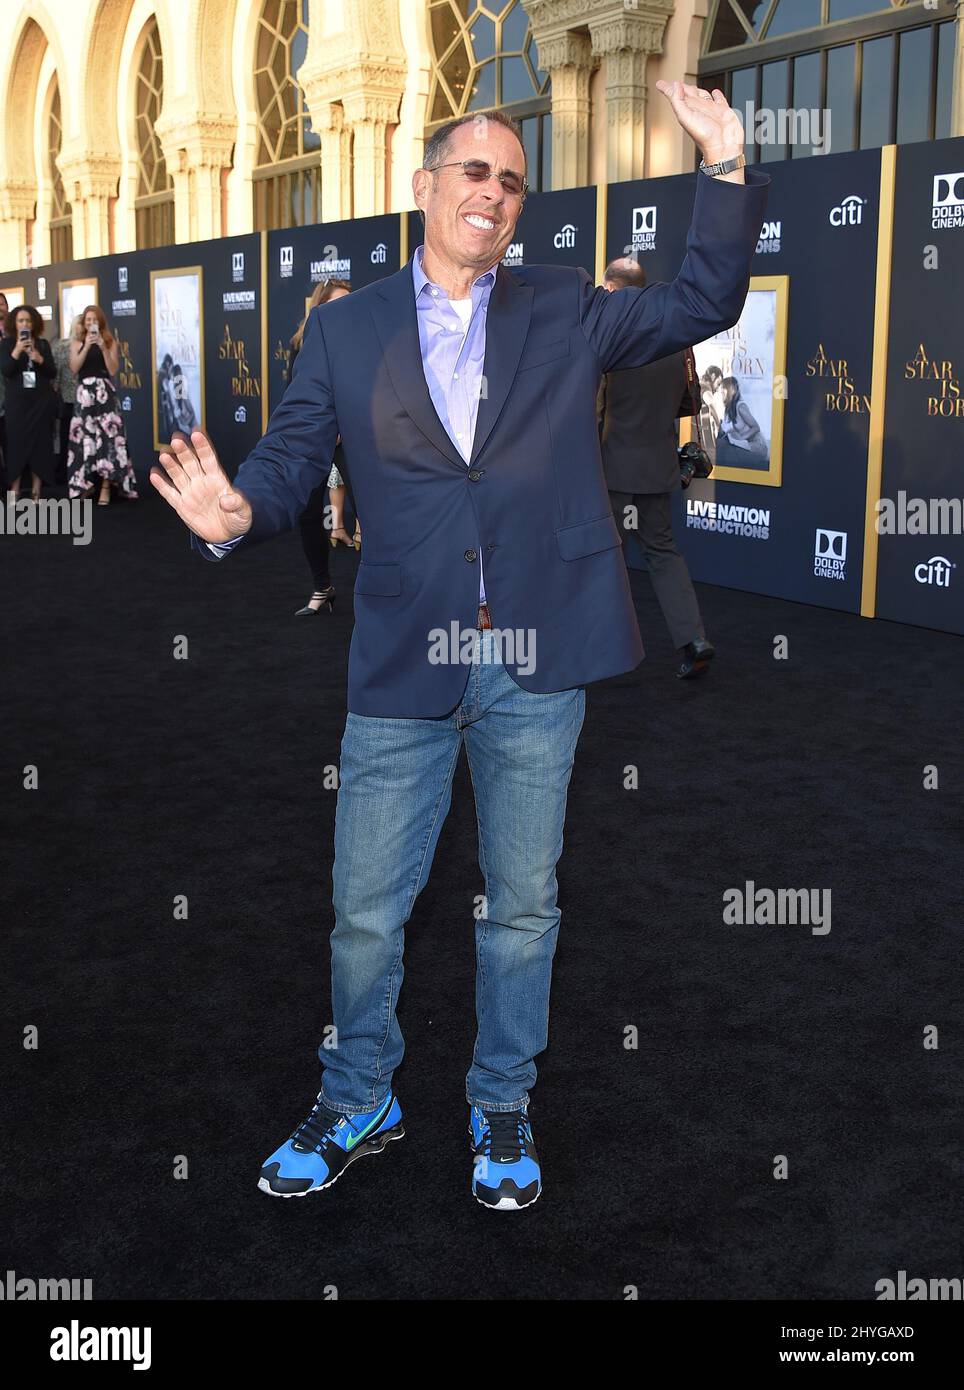 Jerry Seinfeld attending the premiere of A Star Is Born, in Los Angeles, California Stock Photo